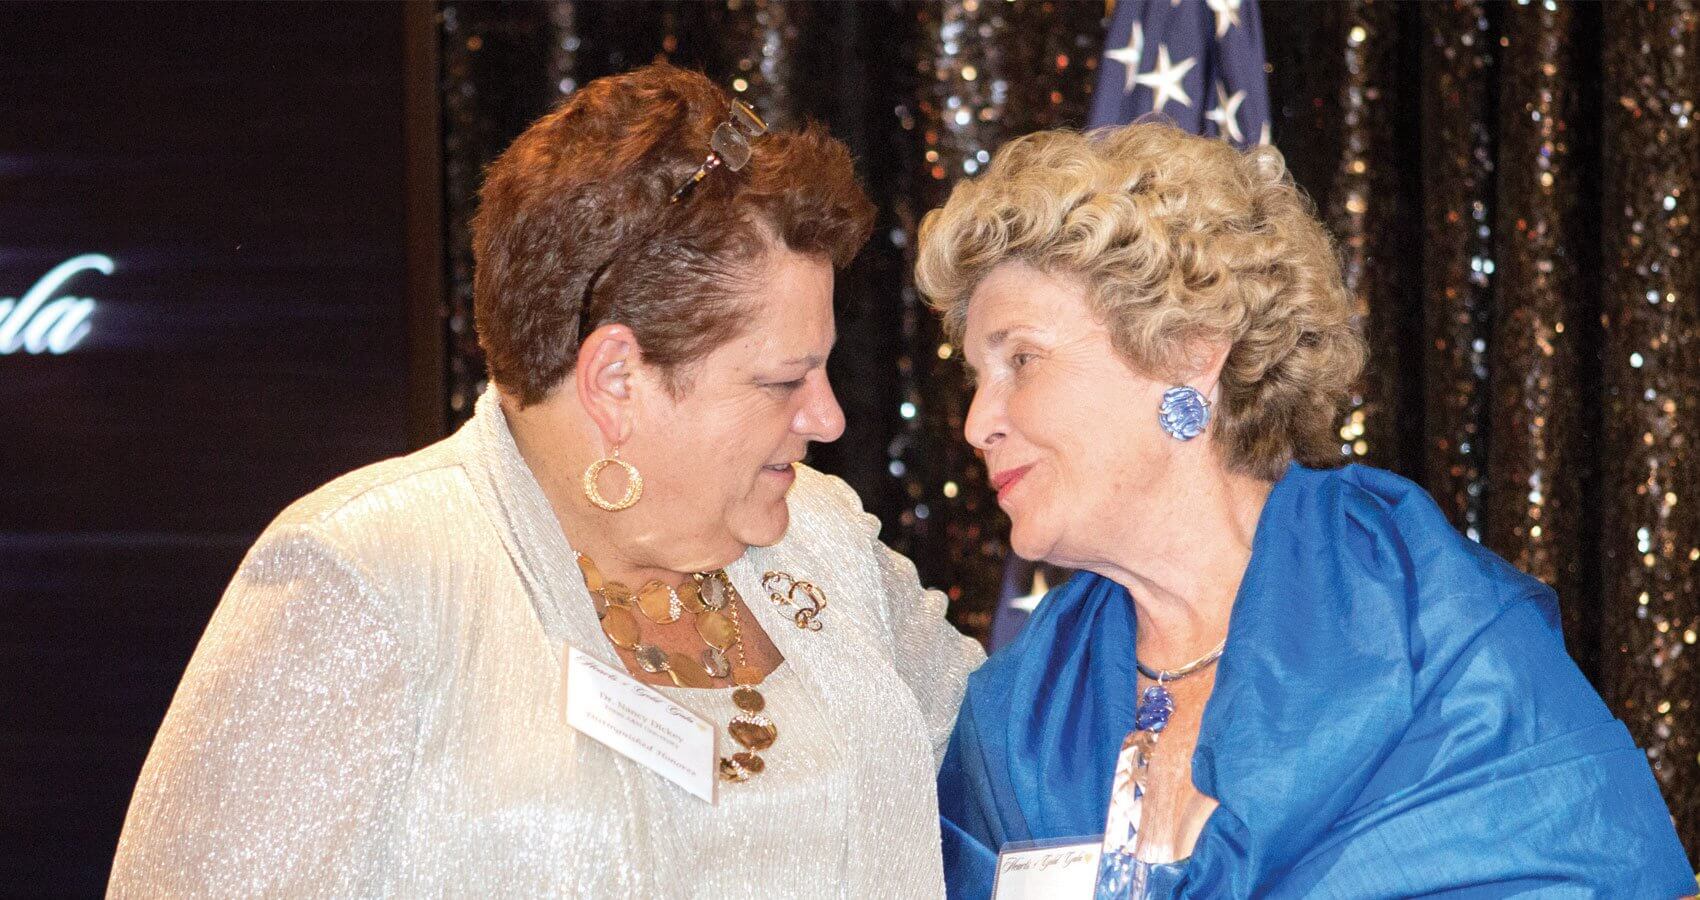 Honoree Nancy W. Dickey, M.D., and Karen Tellepsen, co-chair of the Hearts of Gold Gala, share a moment on stage